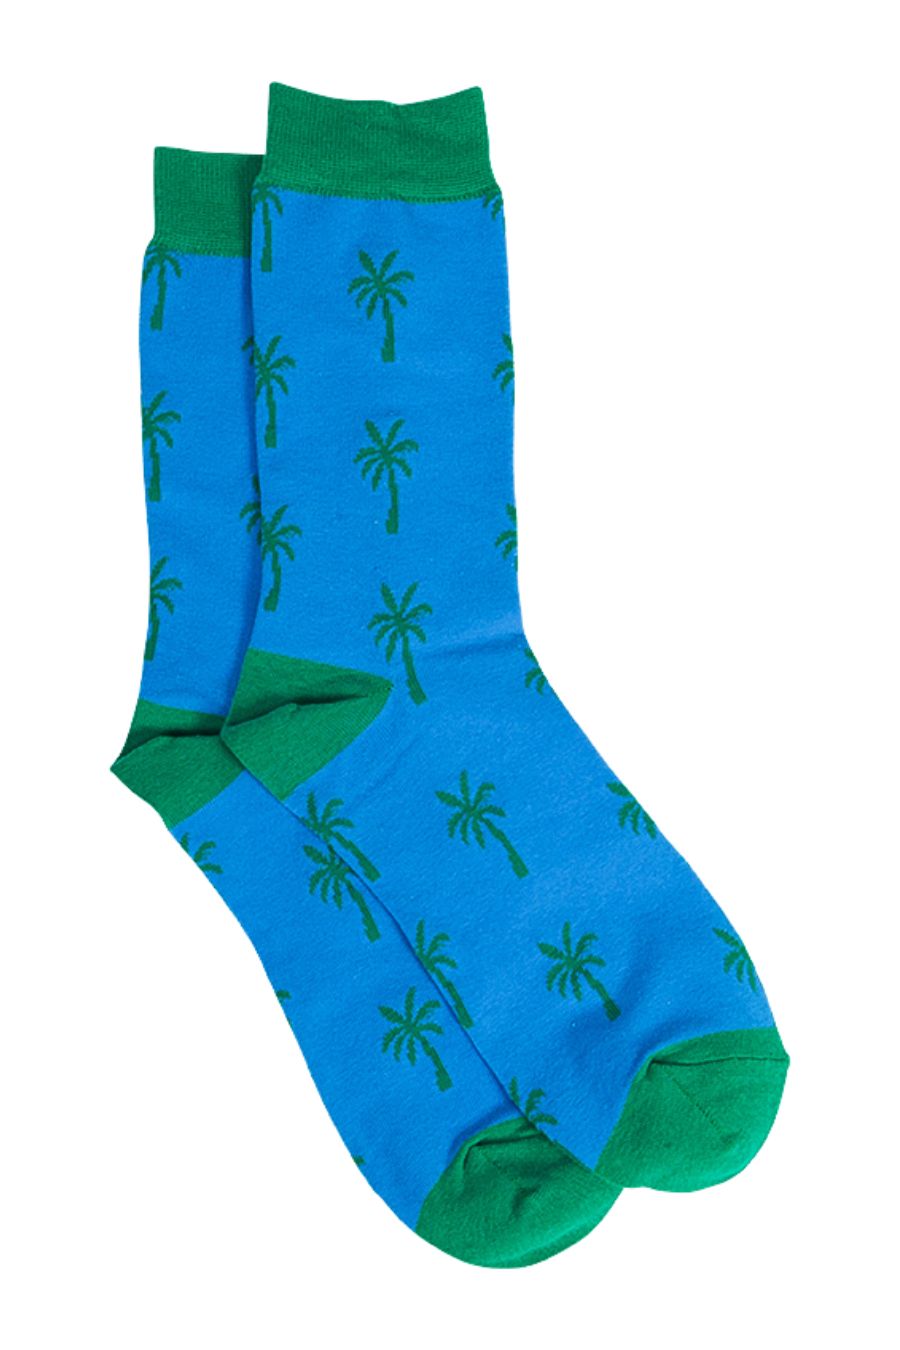 blue socks with a pattern of green palm trees